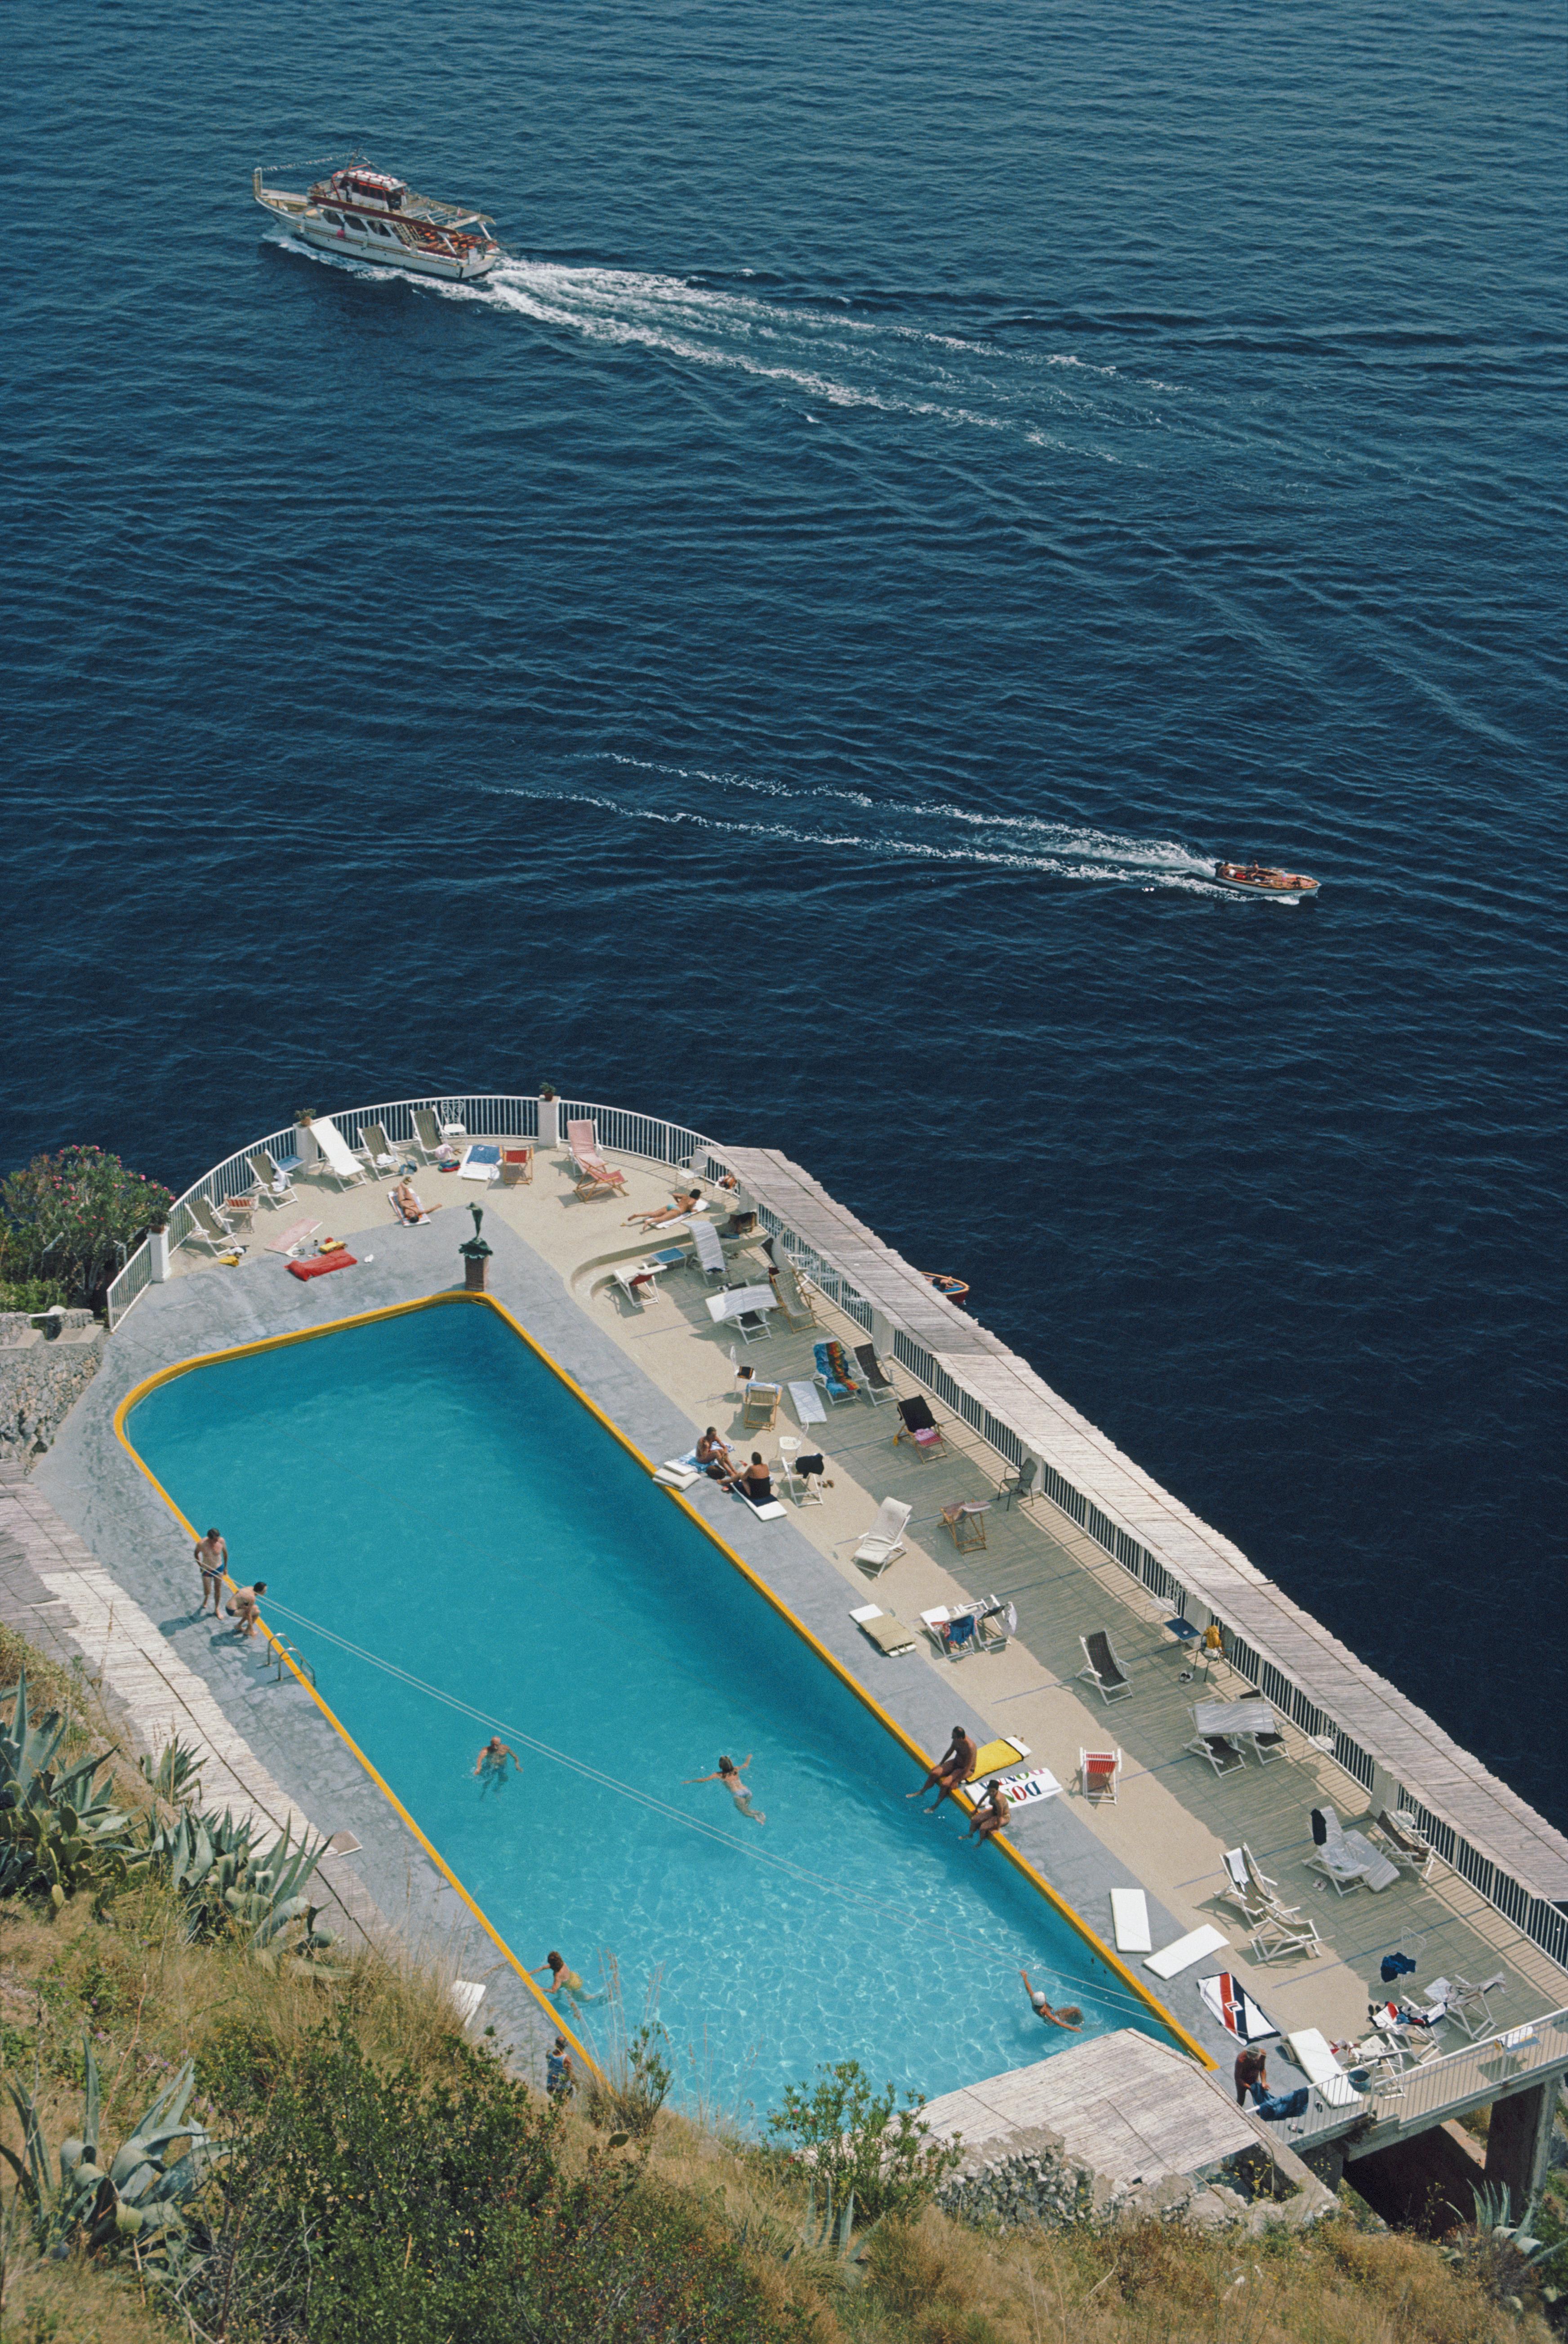 'Belvedere Pool' 1984 Slim Aarons Limited Estate Edition Print 

The swimming pool at the Hotel Belvedere, Amalfi, Italy, August 1984. (Photo by Slim Aarons/Hulton Archive/Getty Images)

Produced from the original transparency
Certificate of